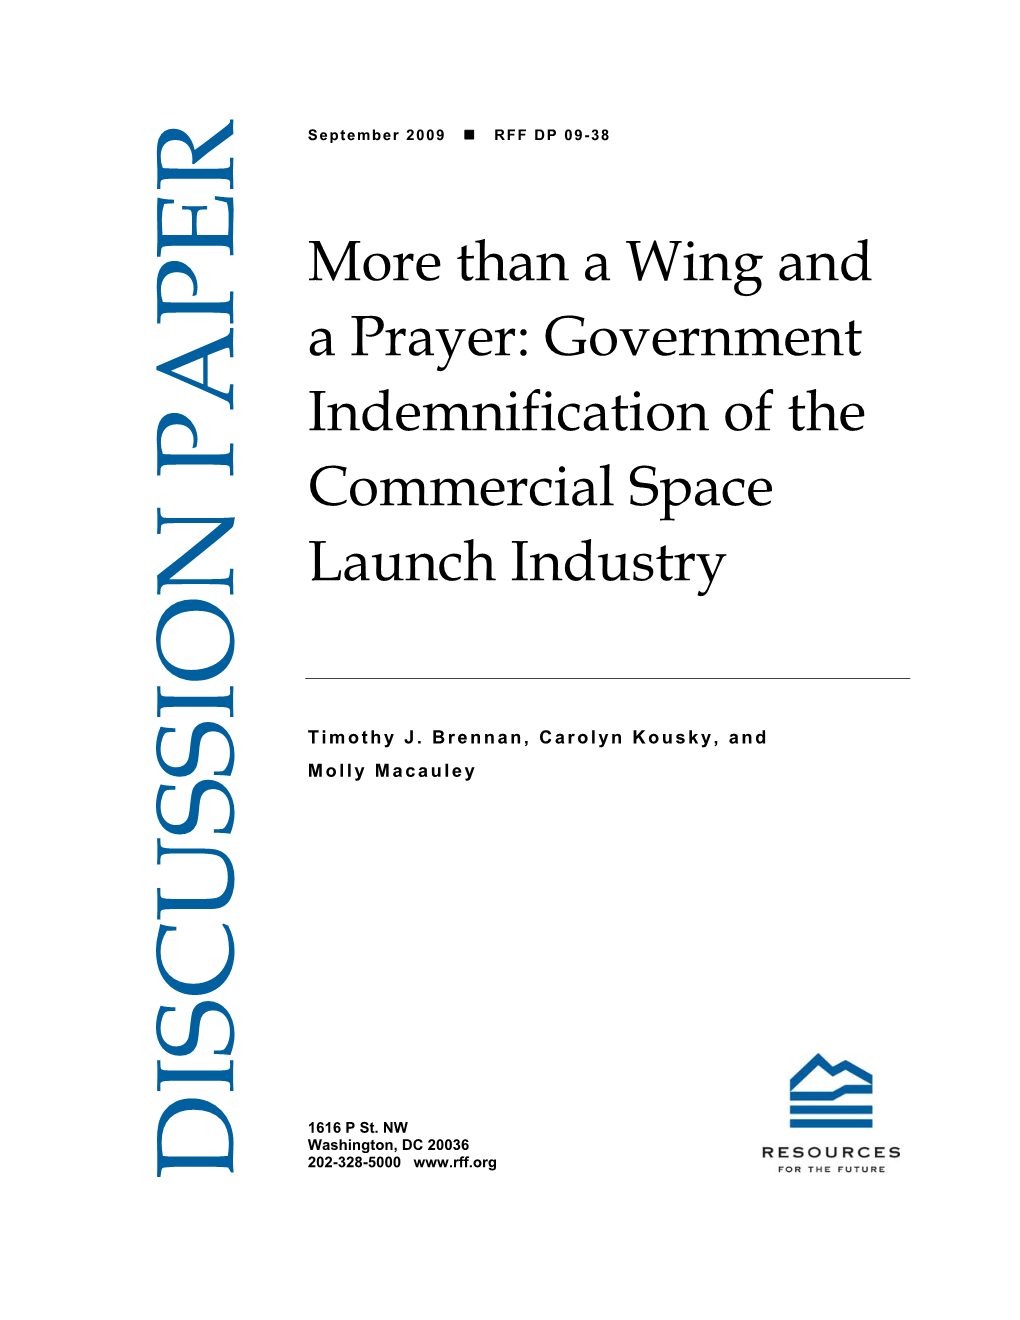 Government Indemnification of the Commercial Space Launch Industry